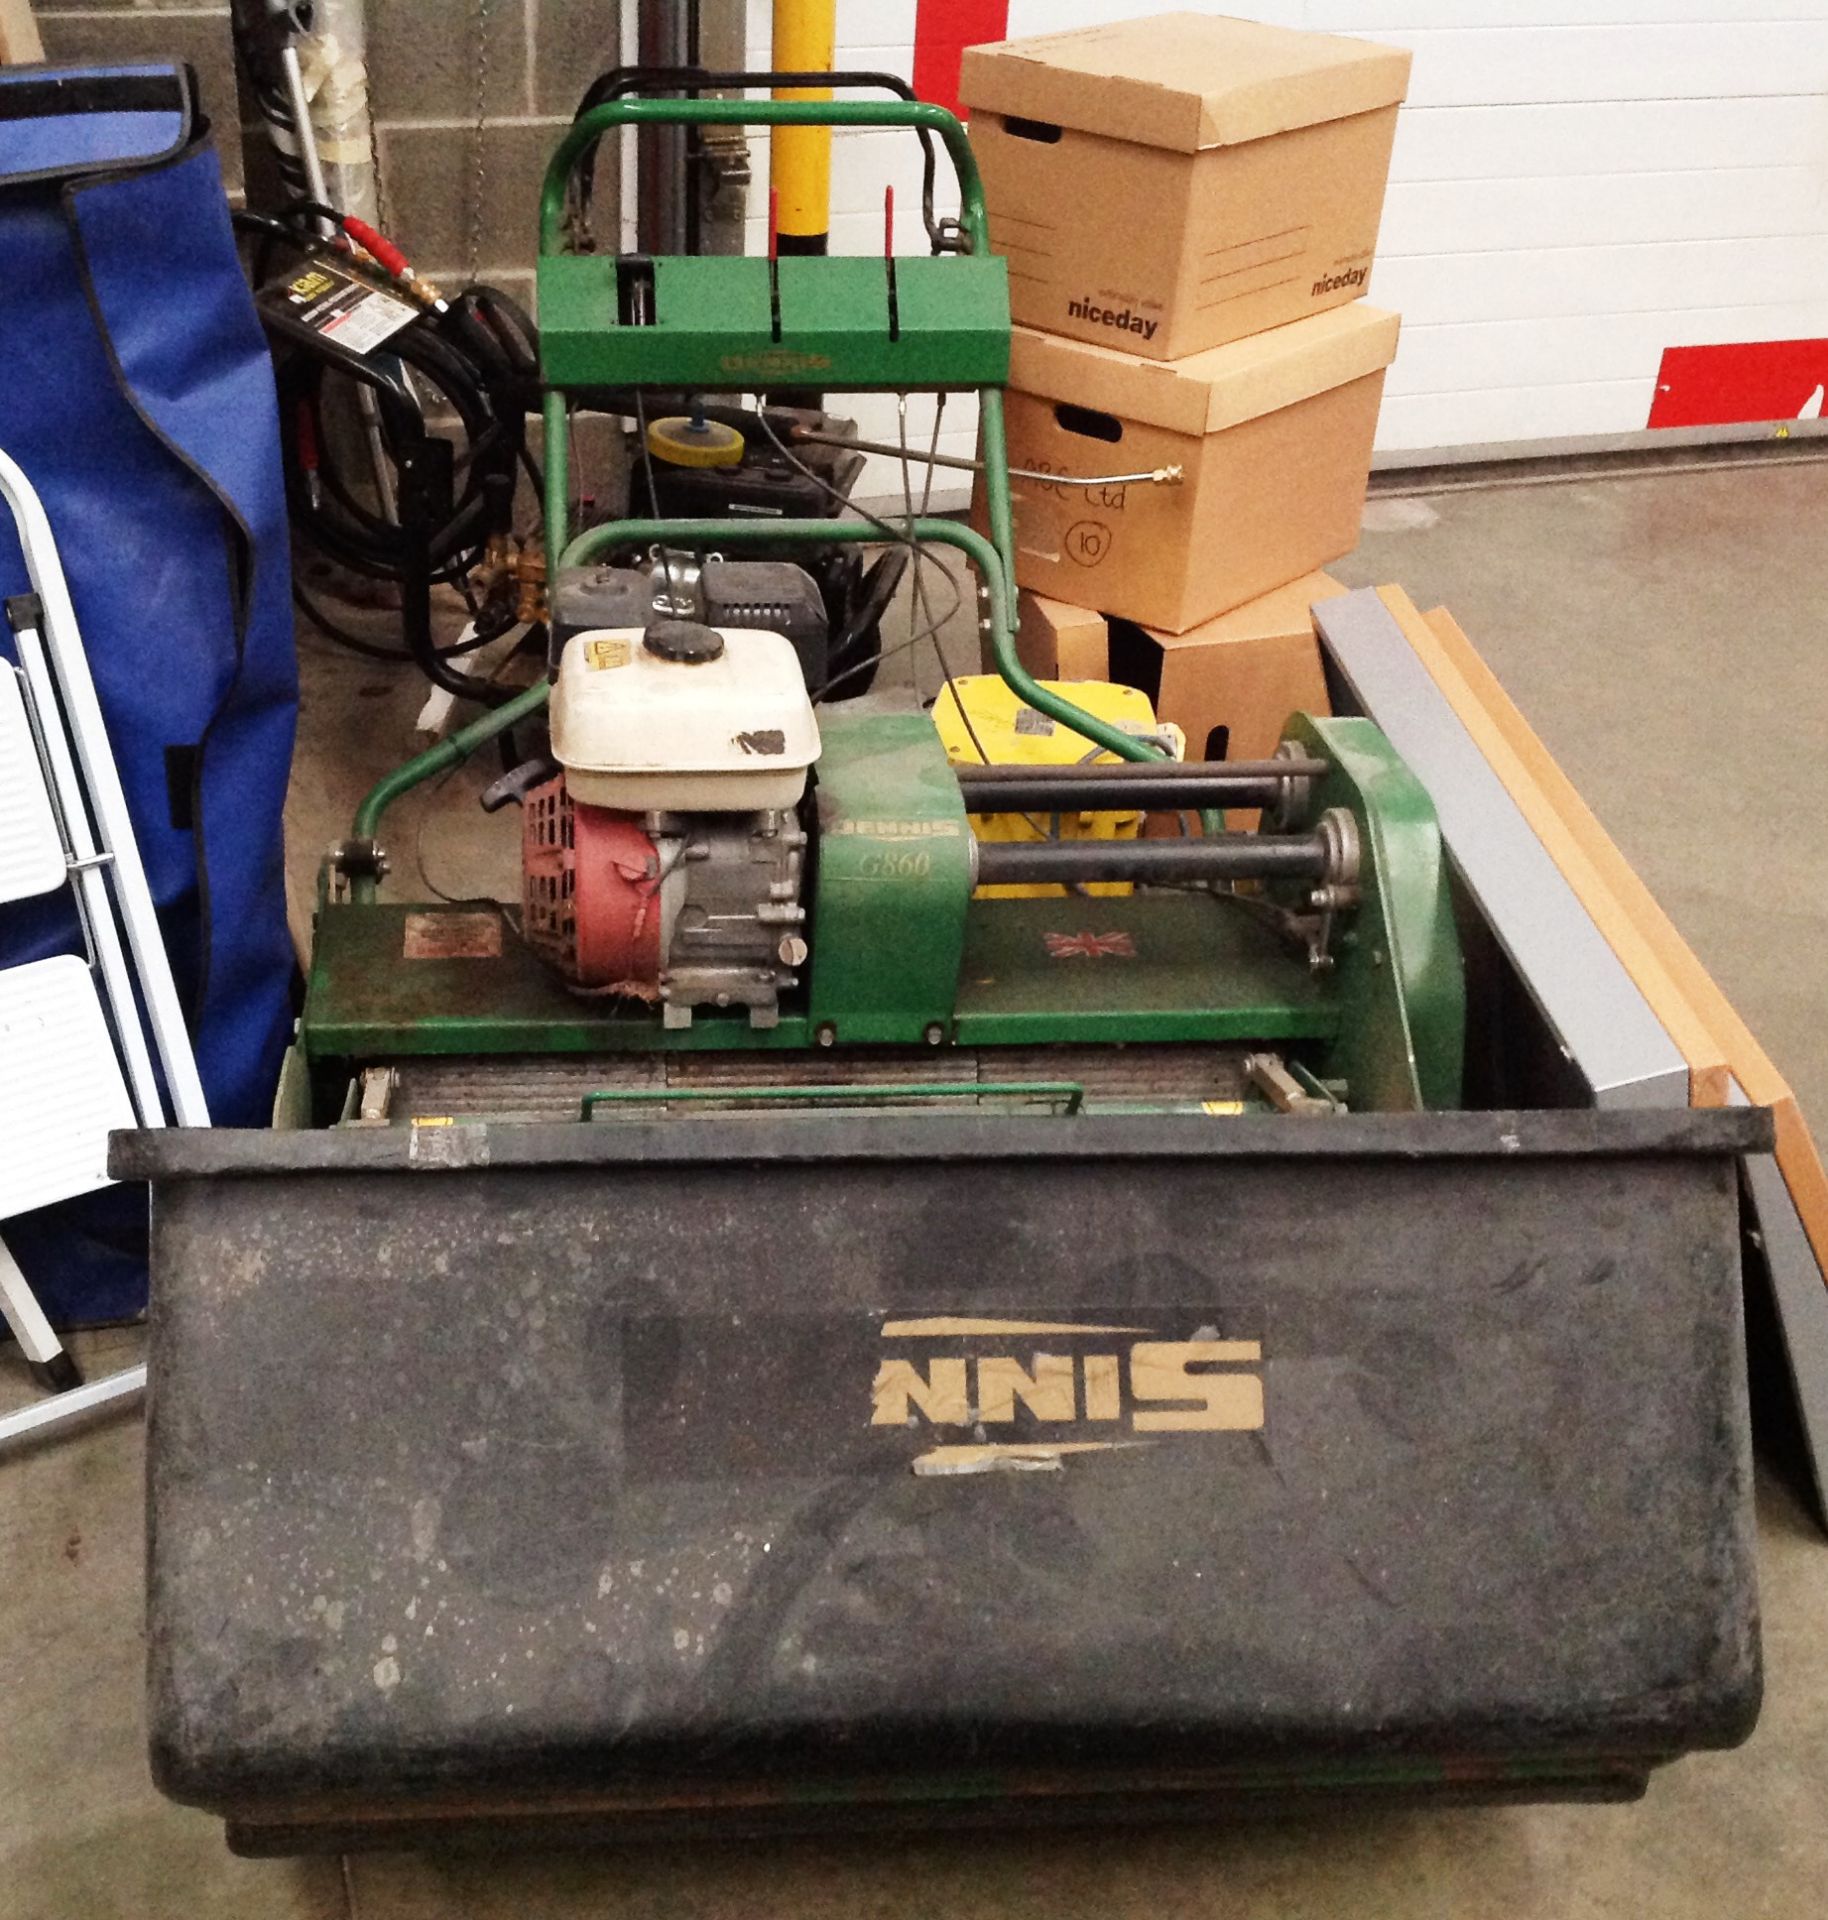 A DENNIS WALK BEHIND 3' (90cm) rotary petrol mower complete with collection bucket - not tested or